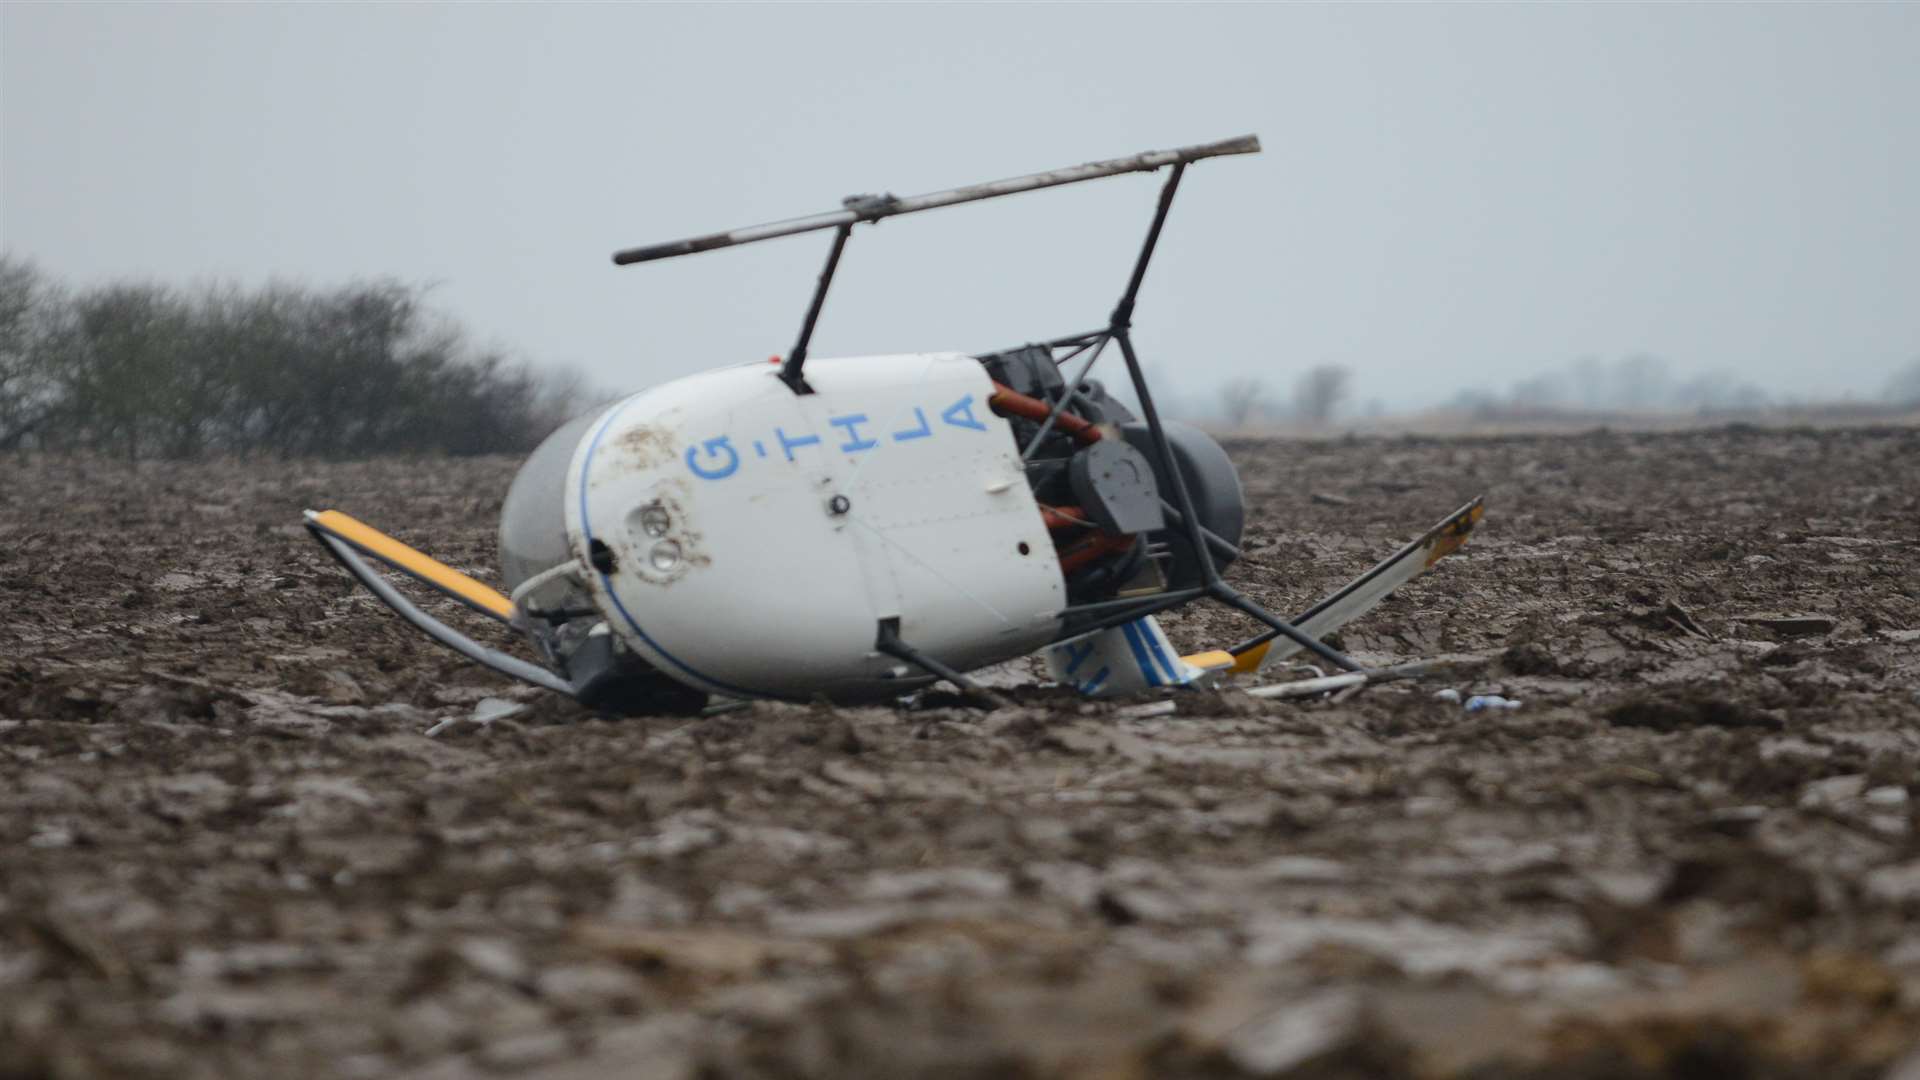 The Robinson R22 two-seater aircraft after in crashed in a field. Picture: Gary Browne